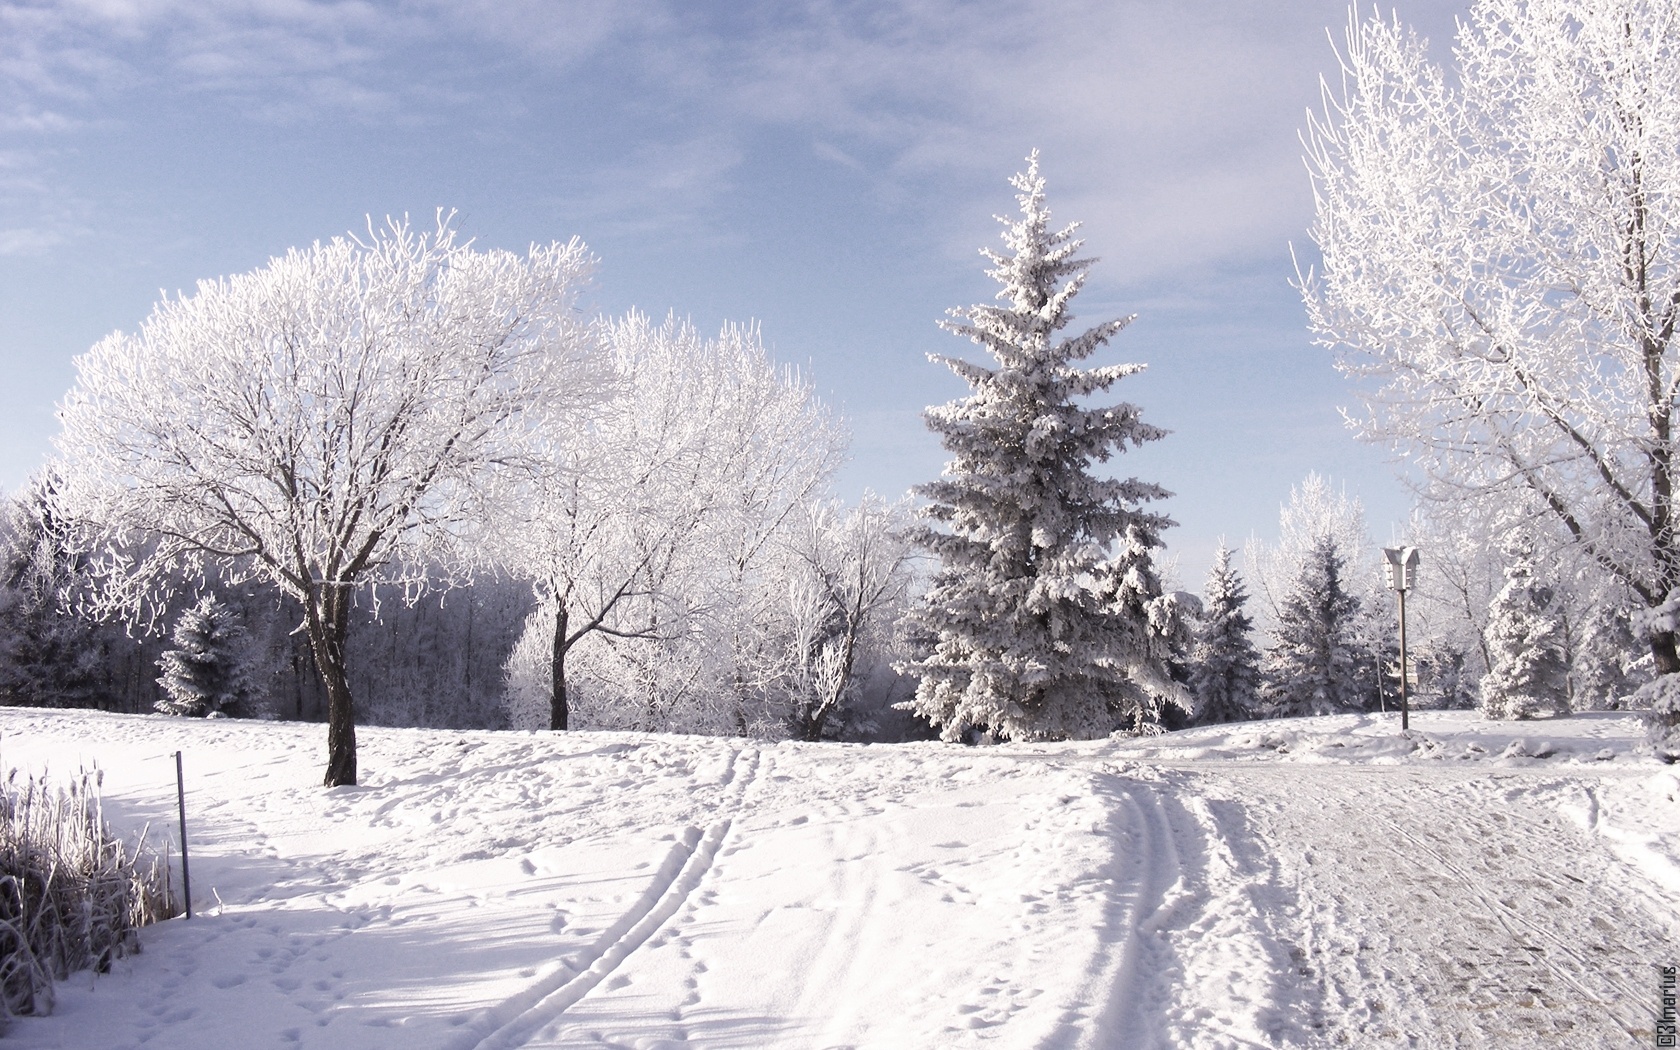 Microsoft Winter Wallpaper Which Is Under The